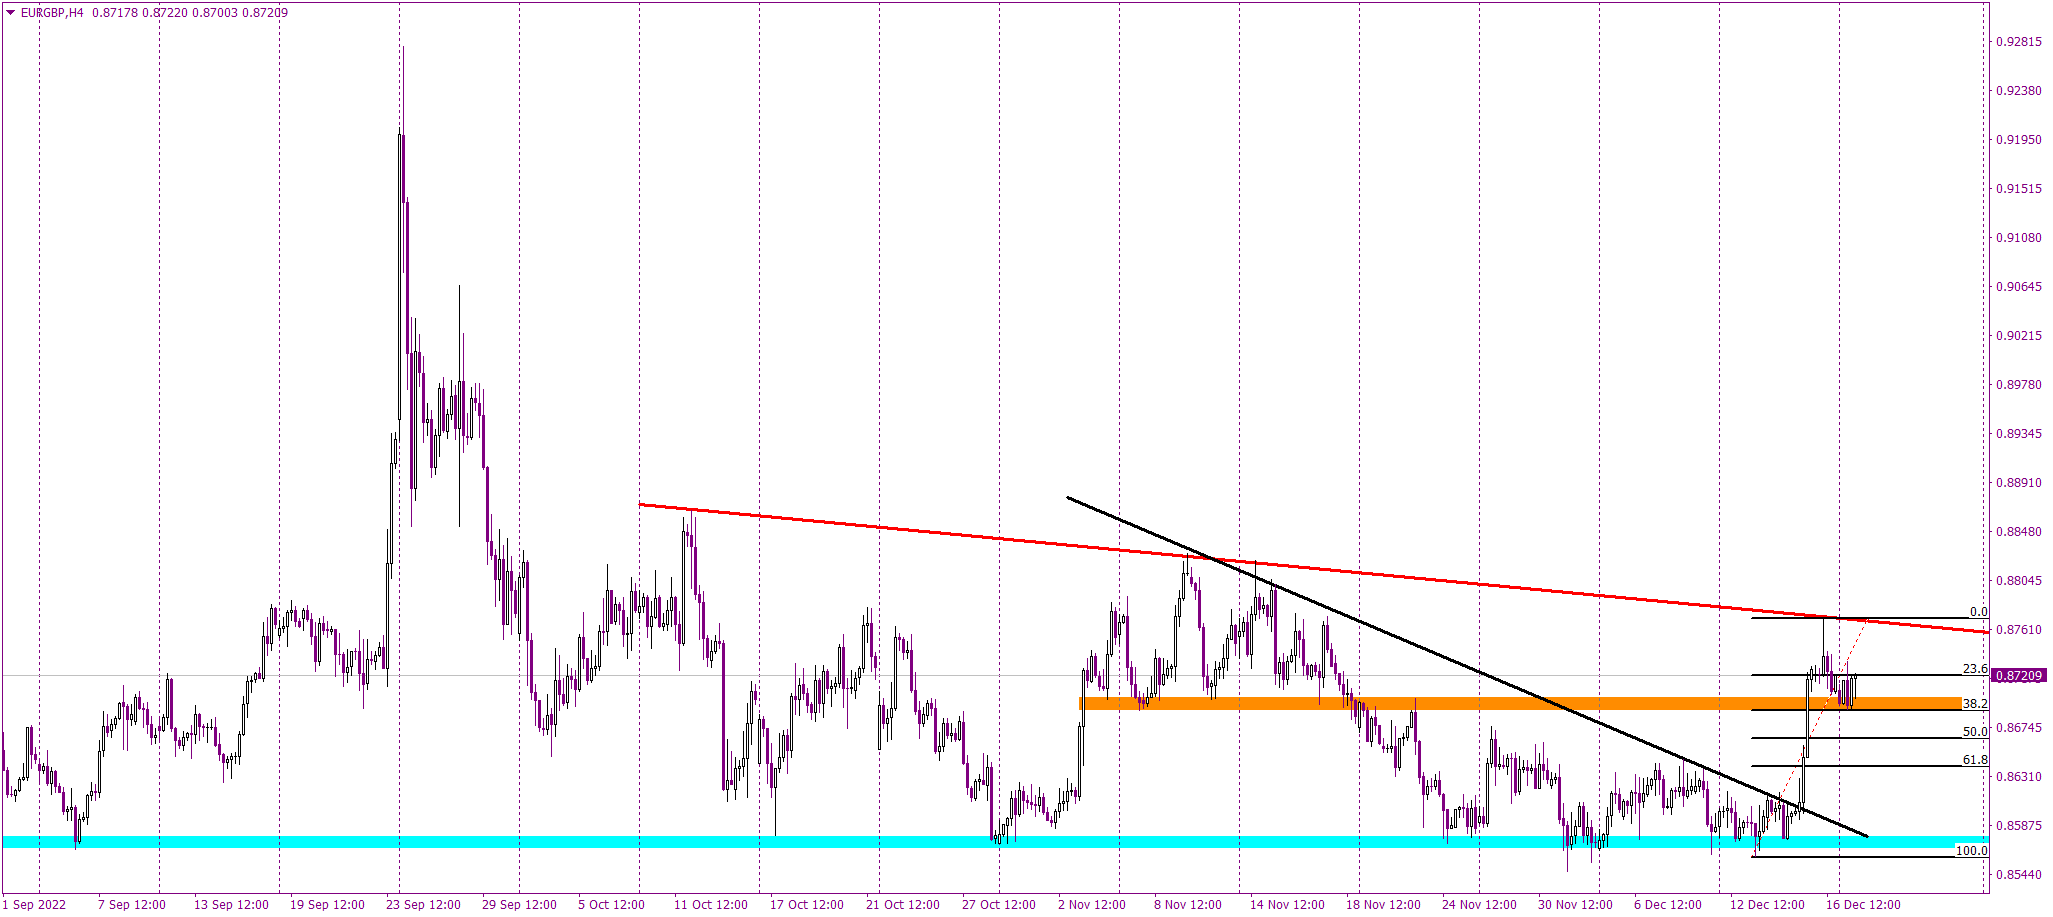 EURGBP defends 0.858 support